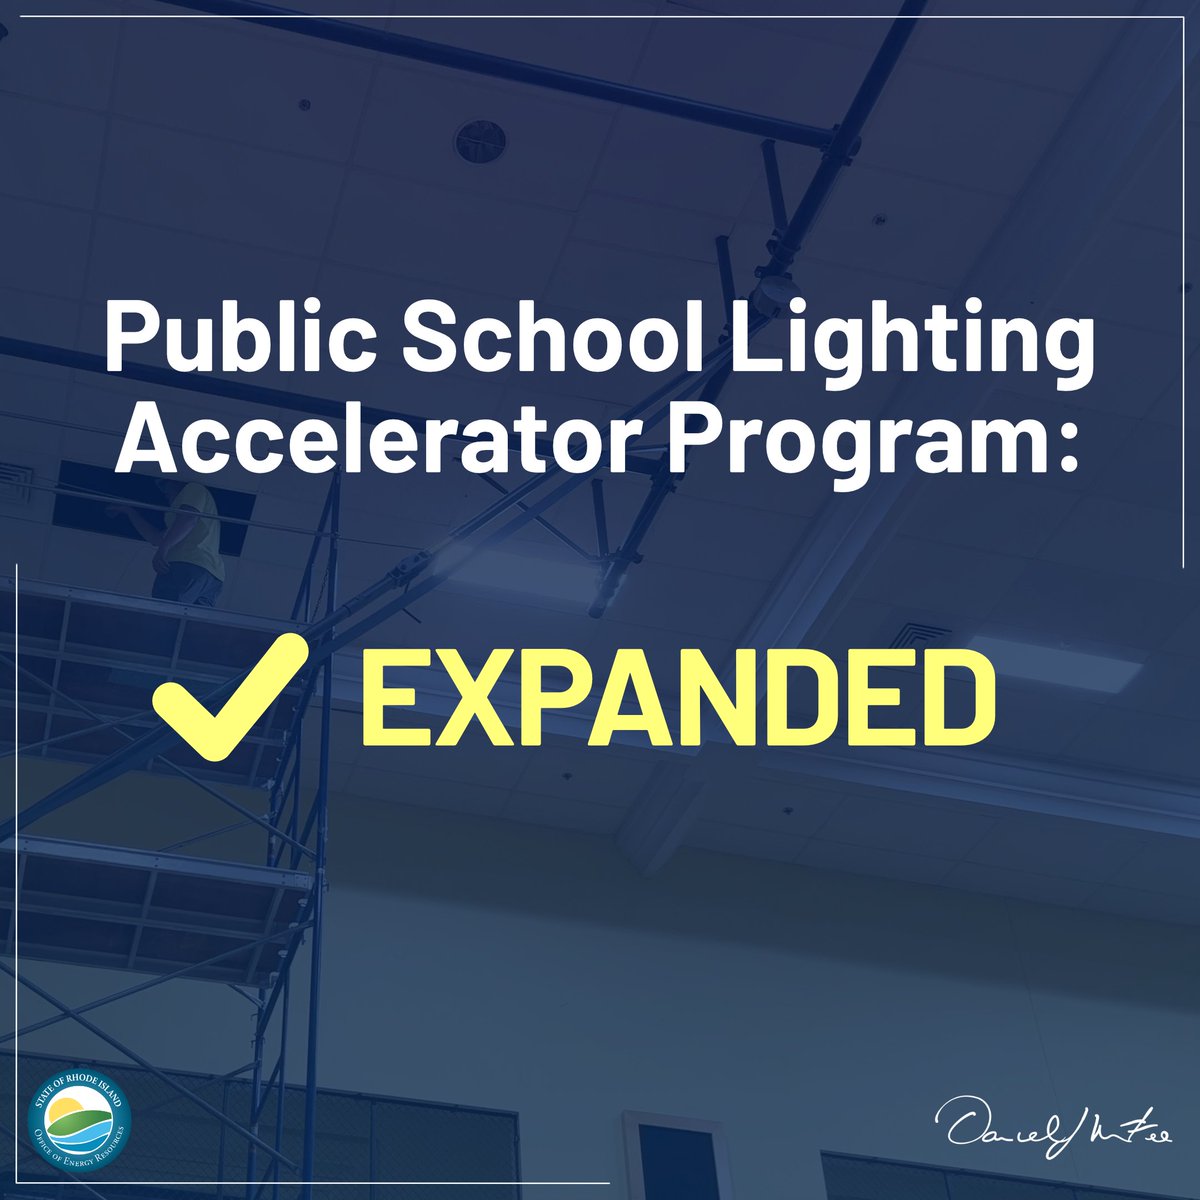 NEW: We’re expanding @EnergyRI's Public School Lighting Accelerator Program to all Rhode Island schools. This initiative helps to reduce energy consumption, promotes long-term cost savings for schools and supports our Act on Climate goals. Learn more: bit.ly/4a2Nd6Q